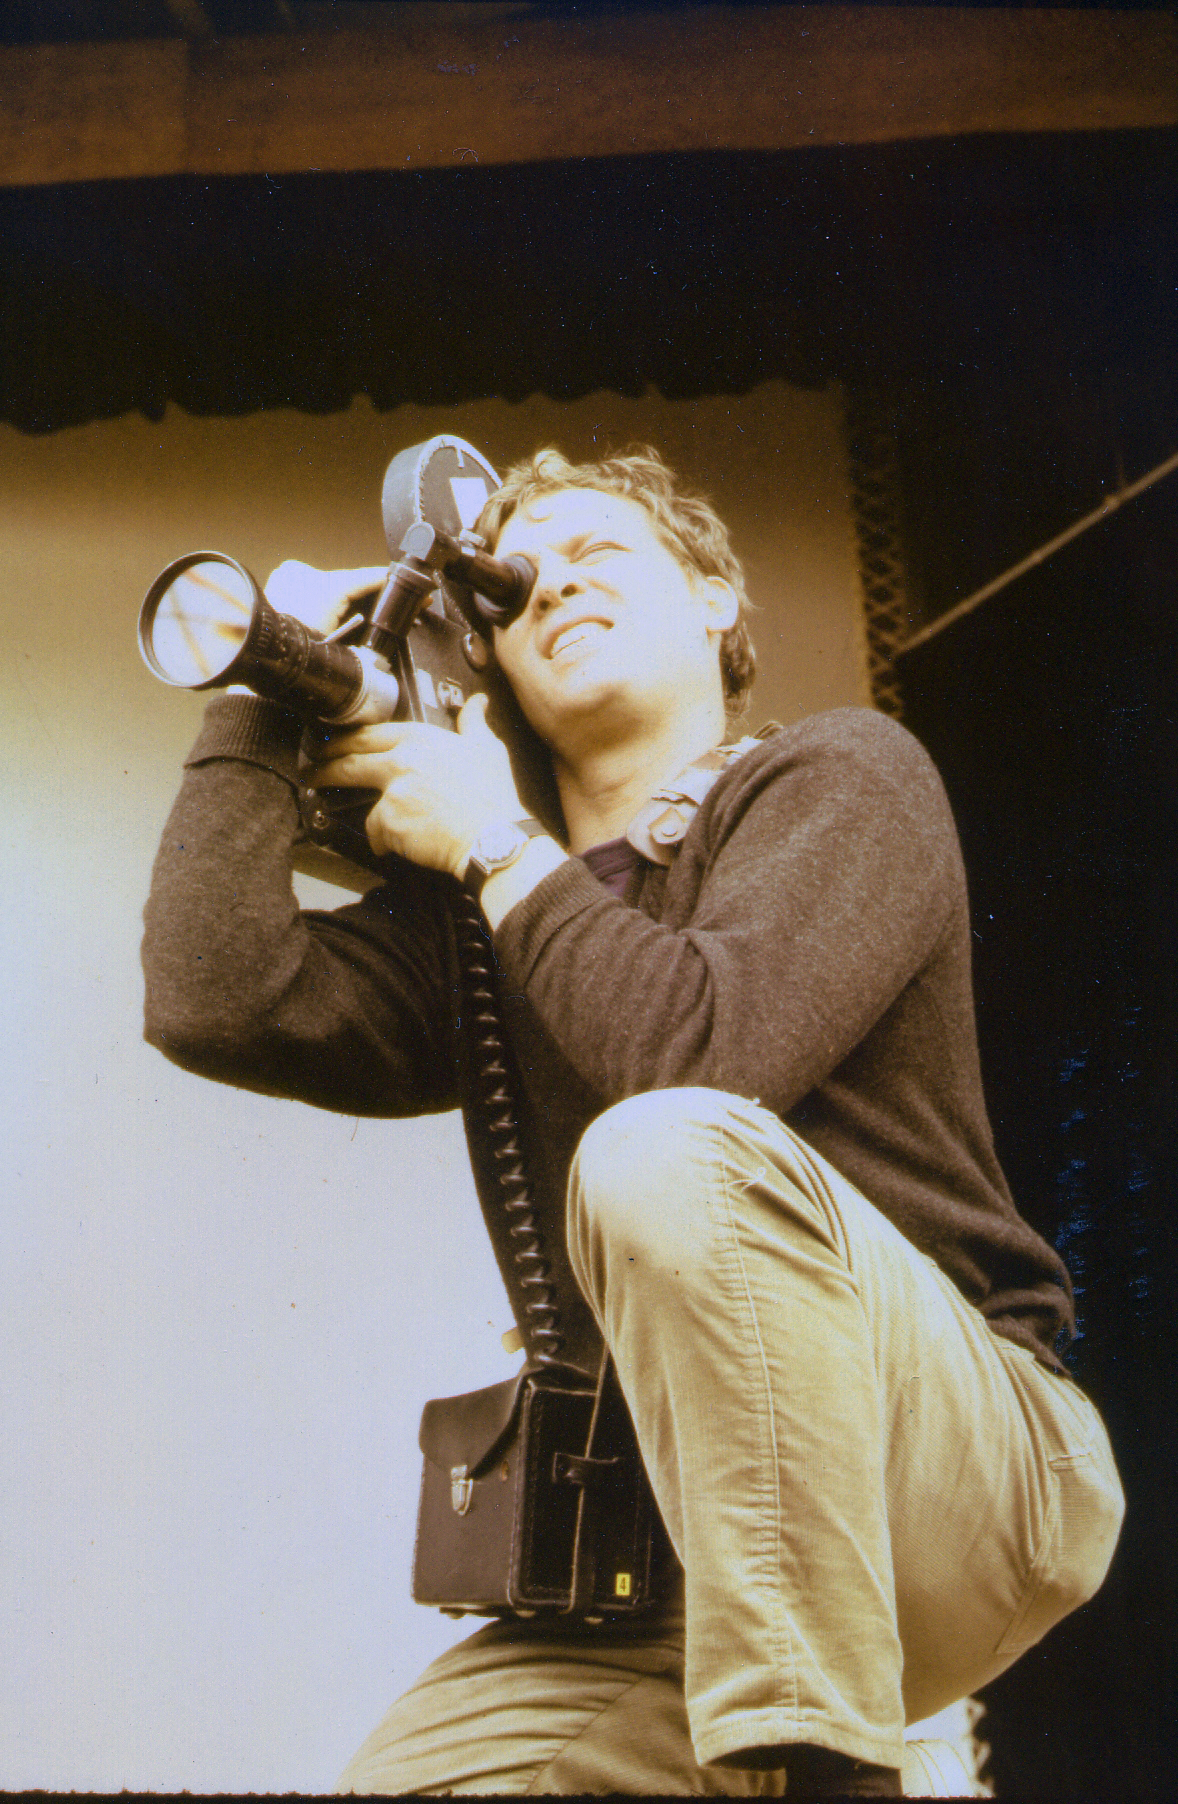 D.A. Pennebaker during the filming of 